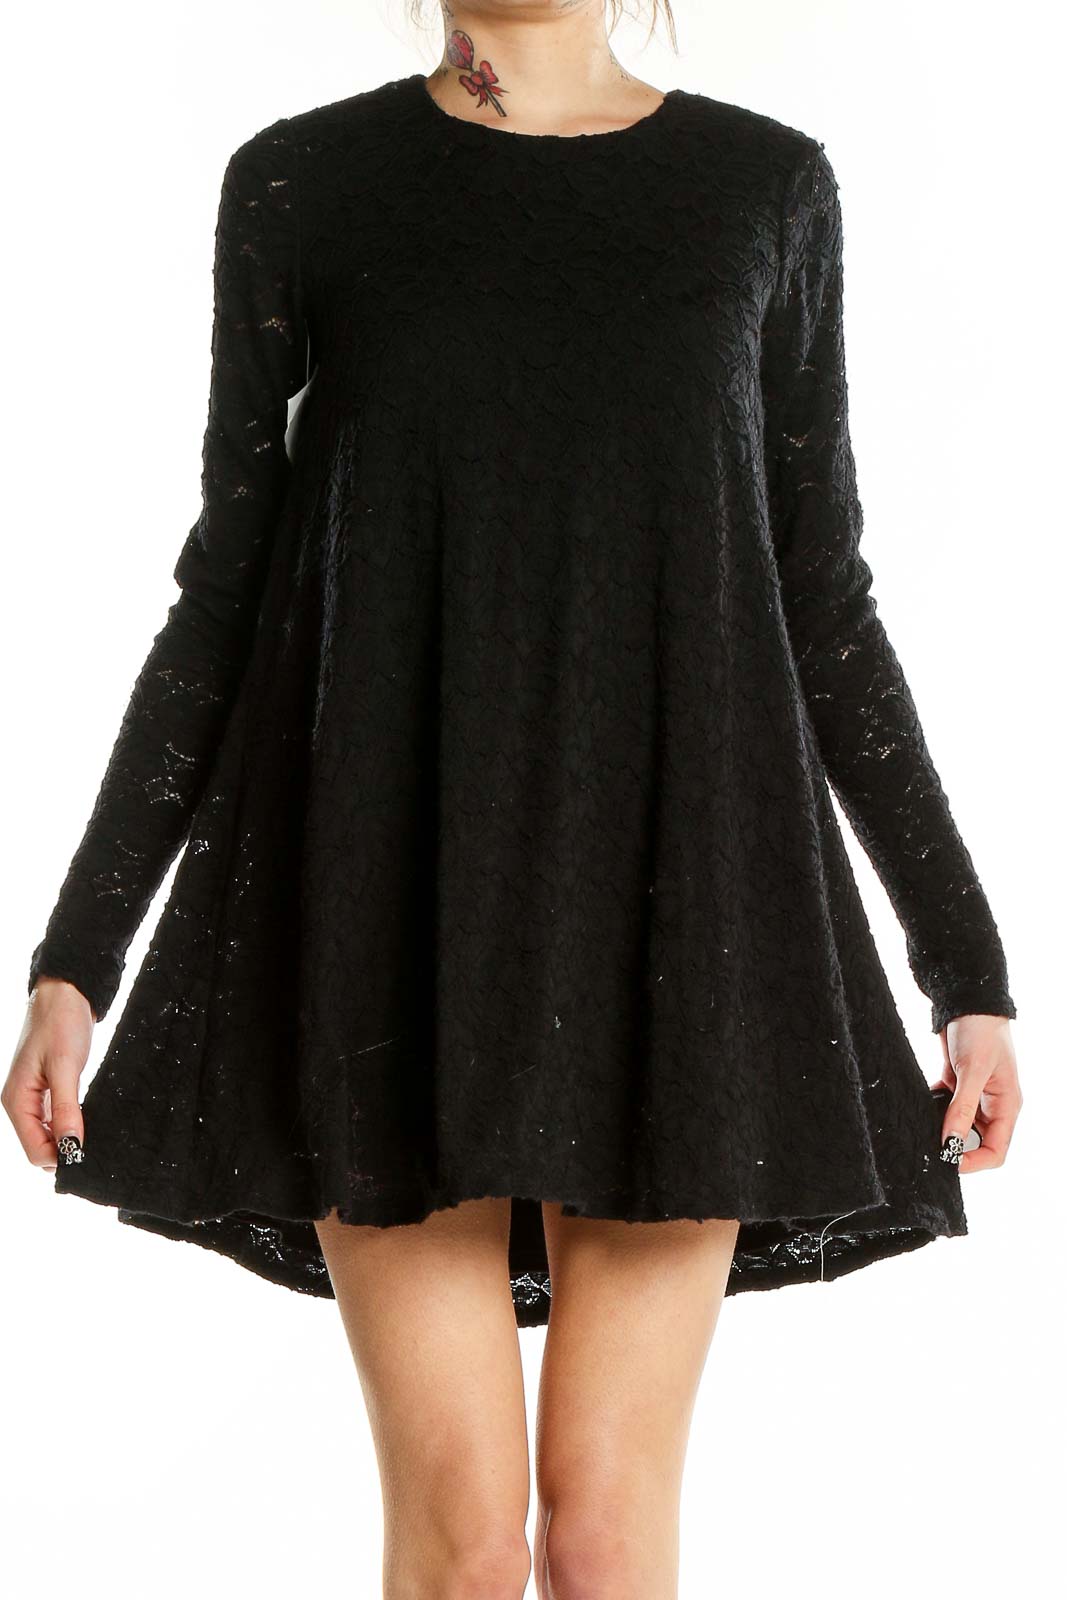 Black Lace Long Sleeve Dress Front